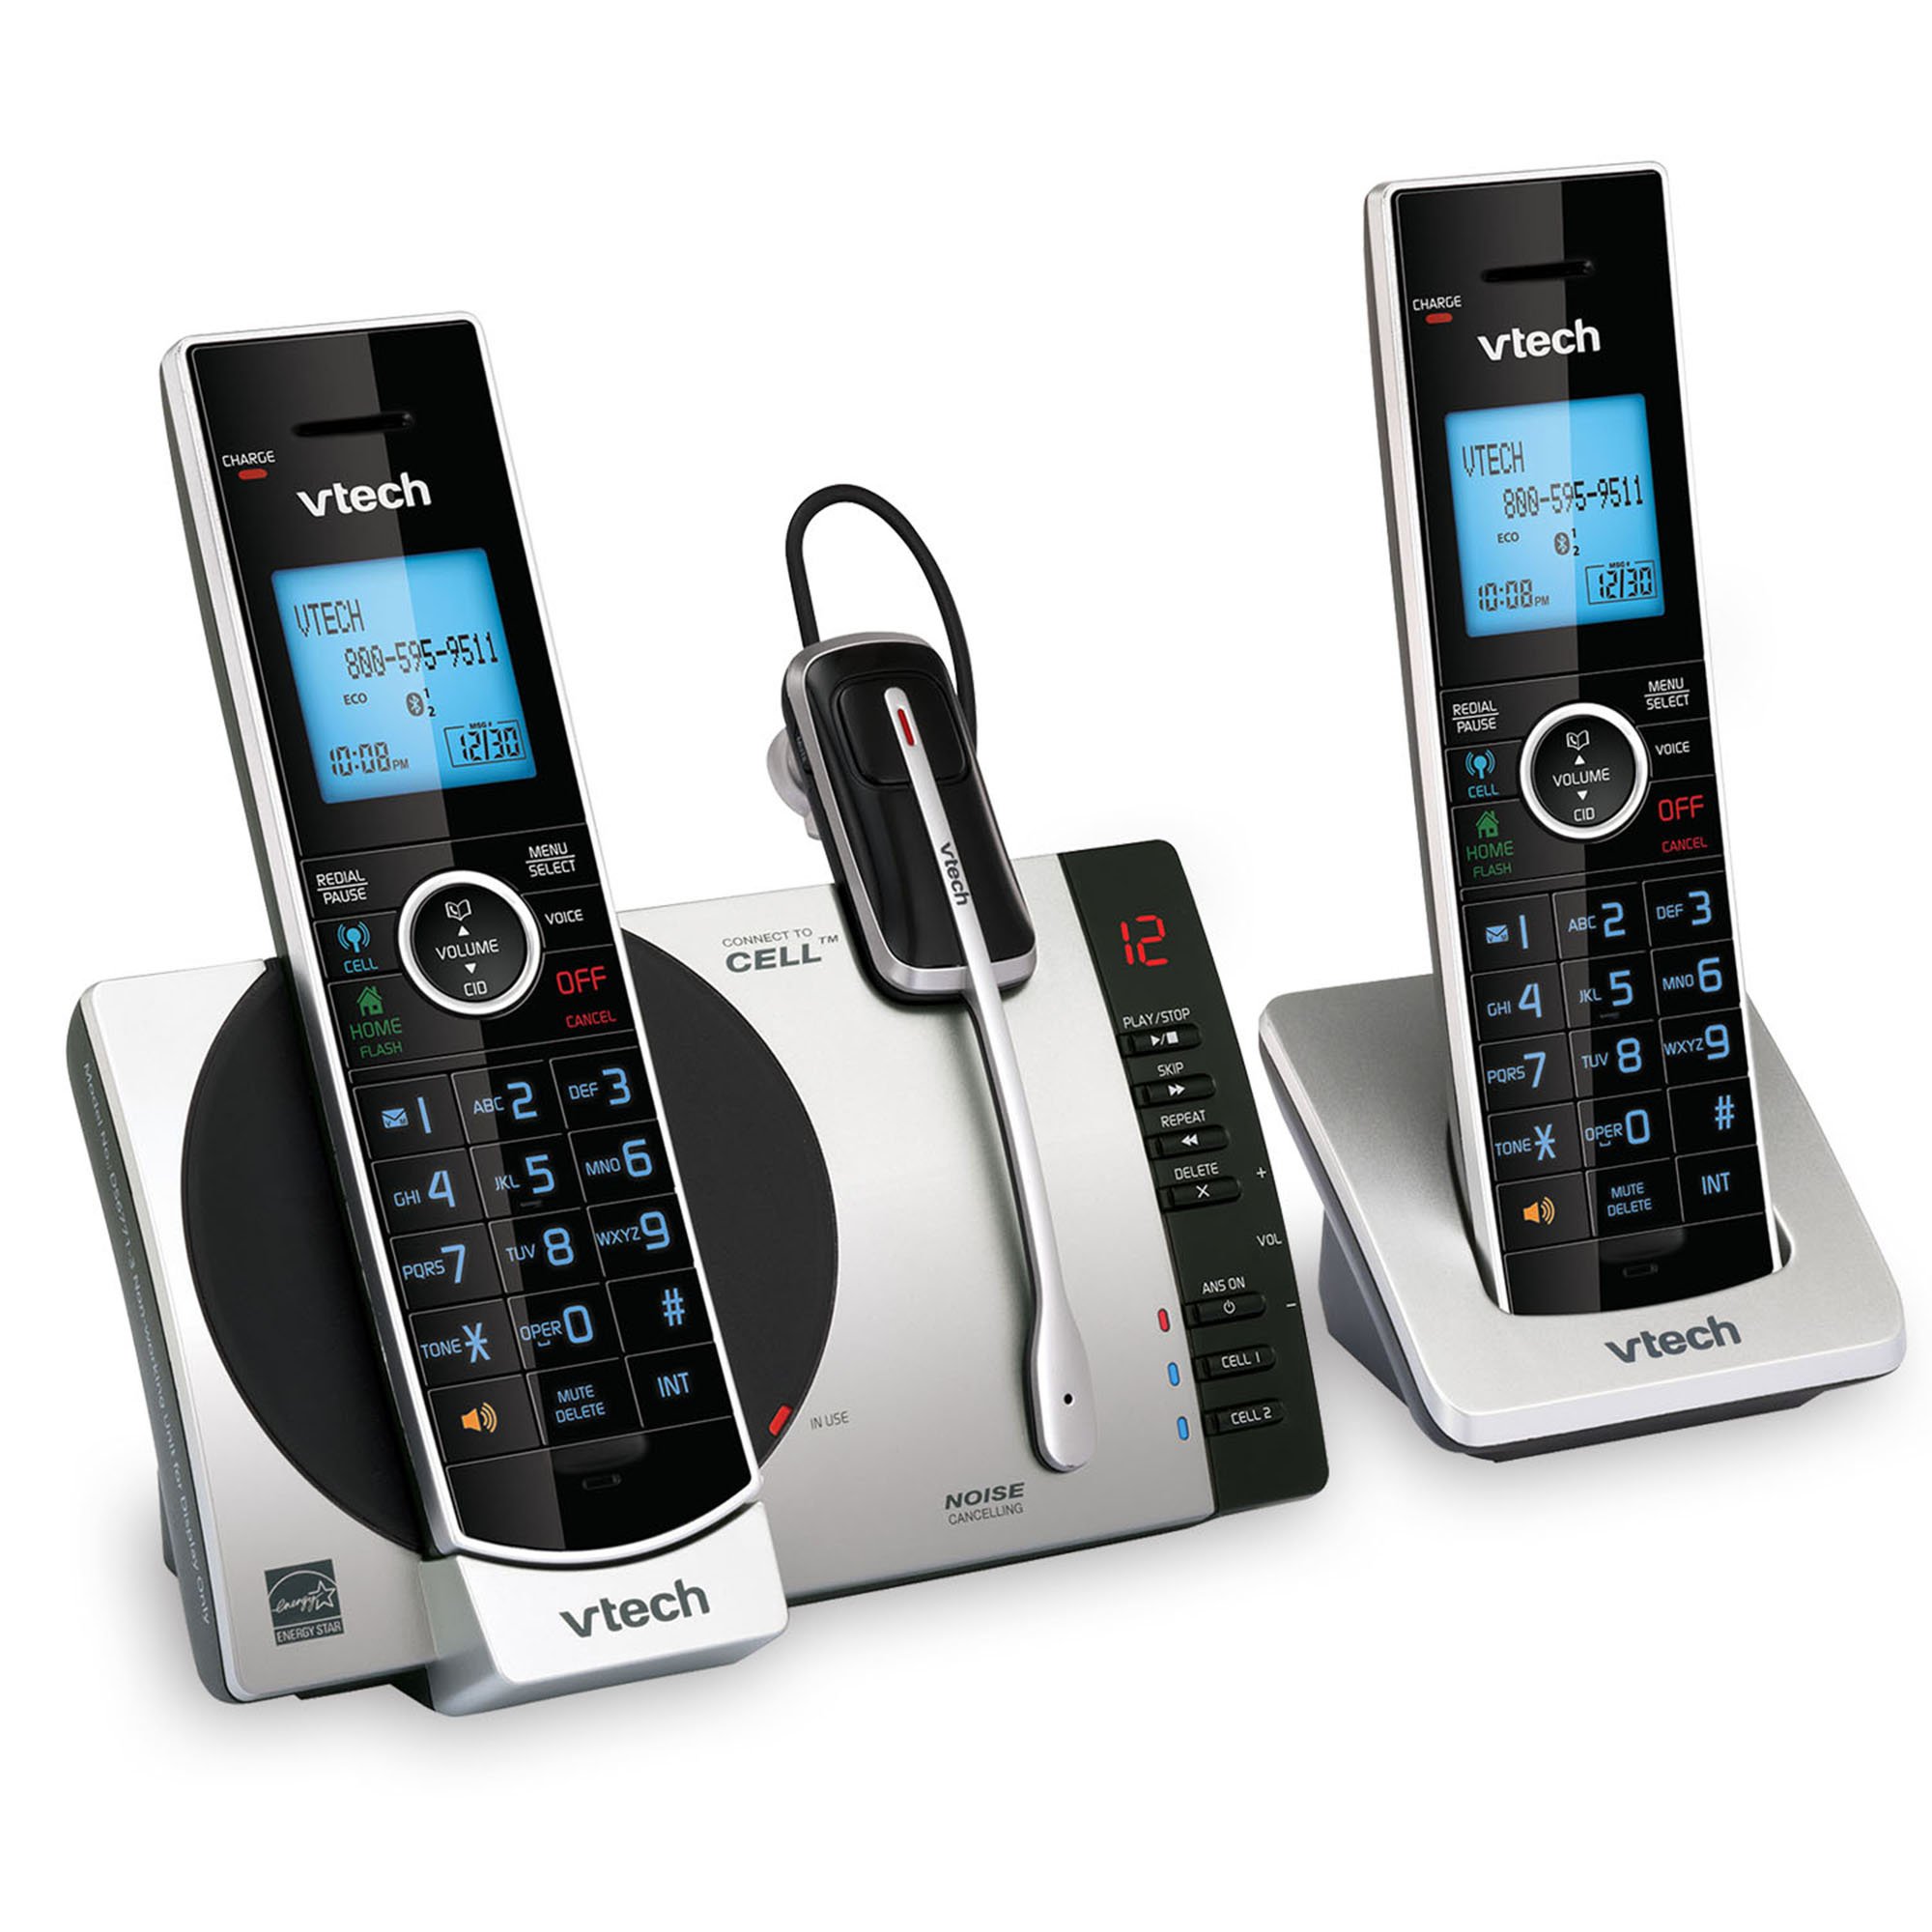 VTech Connect to Cell DS6771-3 DECT 6.0 Cordless Phone - Black, Silver, 6.9